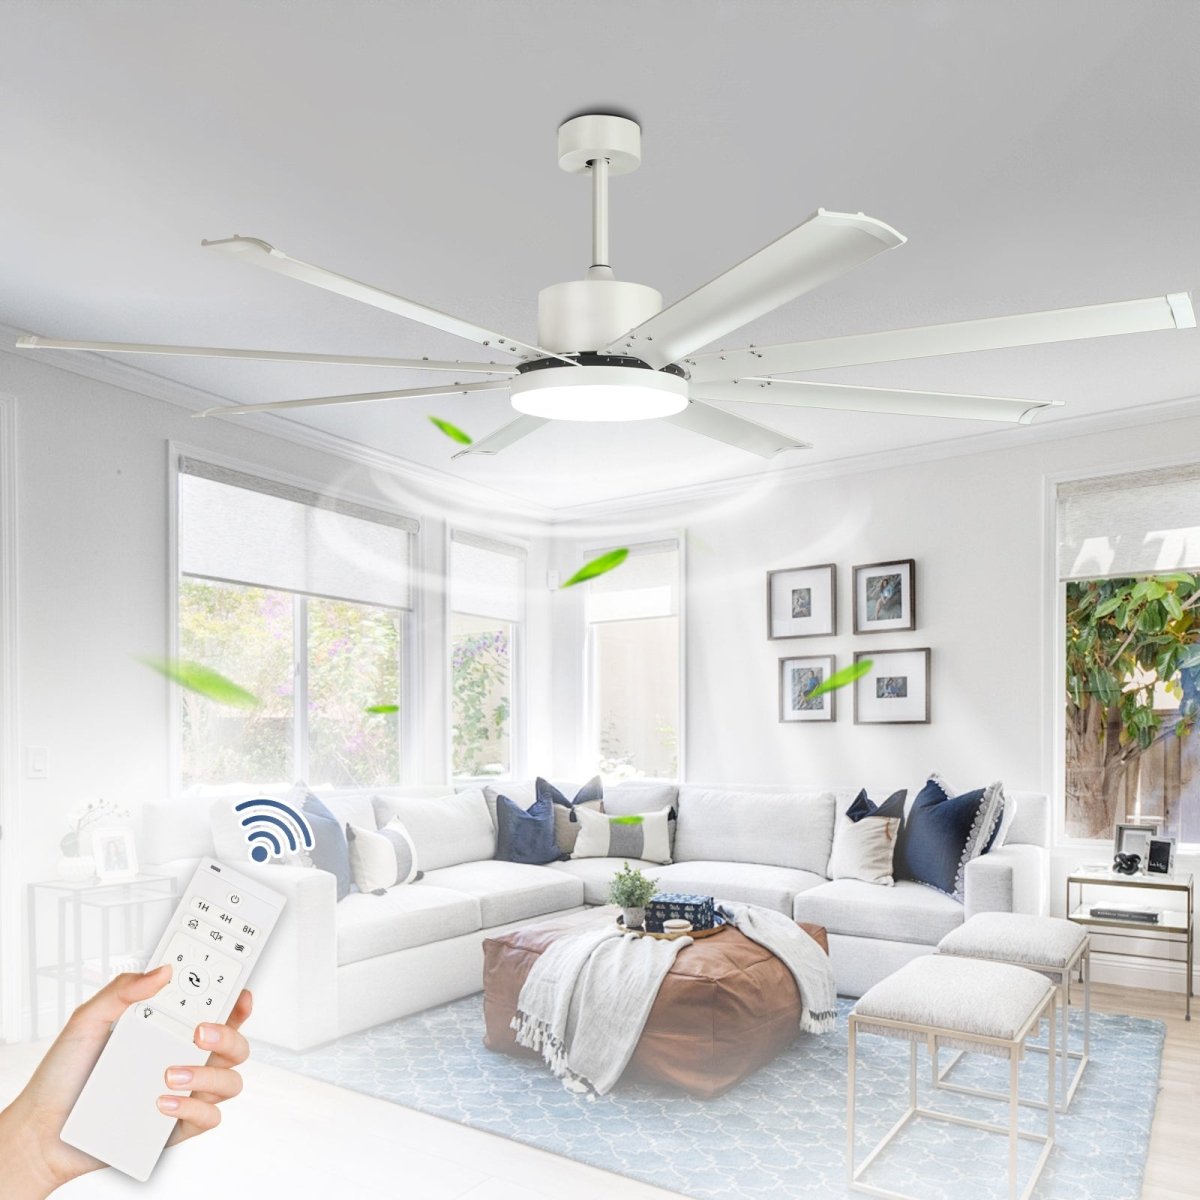 72 Inch Ceiling Fans with Lights and Remote, White Large Ceiling Fan, 6-Speed 8 Aluminum Reversible Blades DC Motor, Industrial Ceiling Fan for Kitchen Living Room Playroom Indoor/Outdoor - WS-FPZ57-24C-8-W 1 | DEPULEY